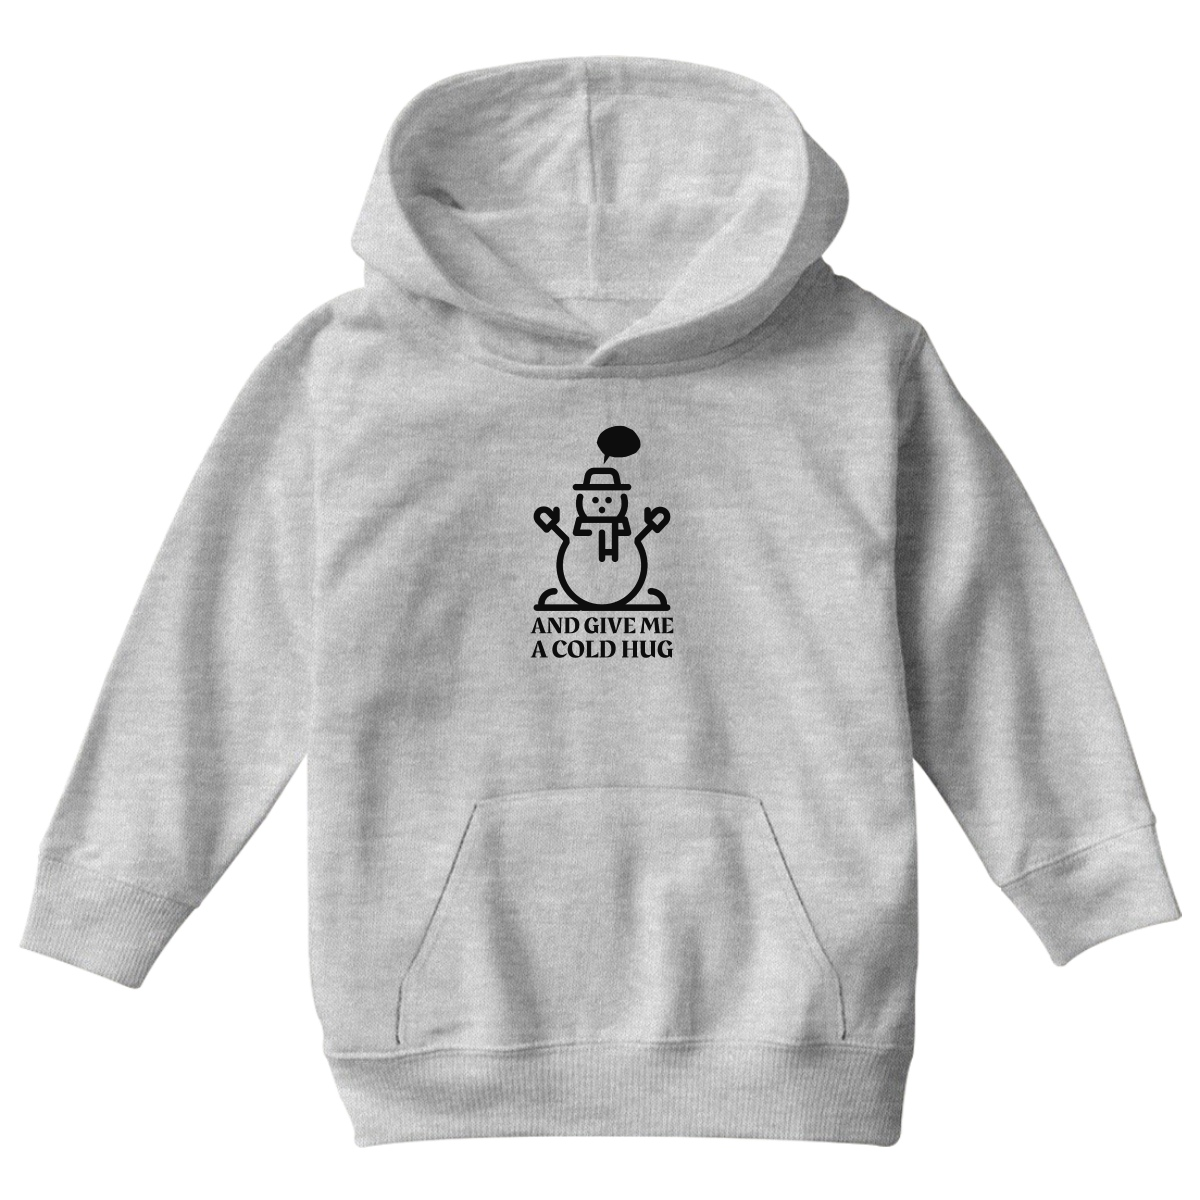 Let It Snow and Give Me a Cold Hug Kids Hoodie | Gray